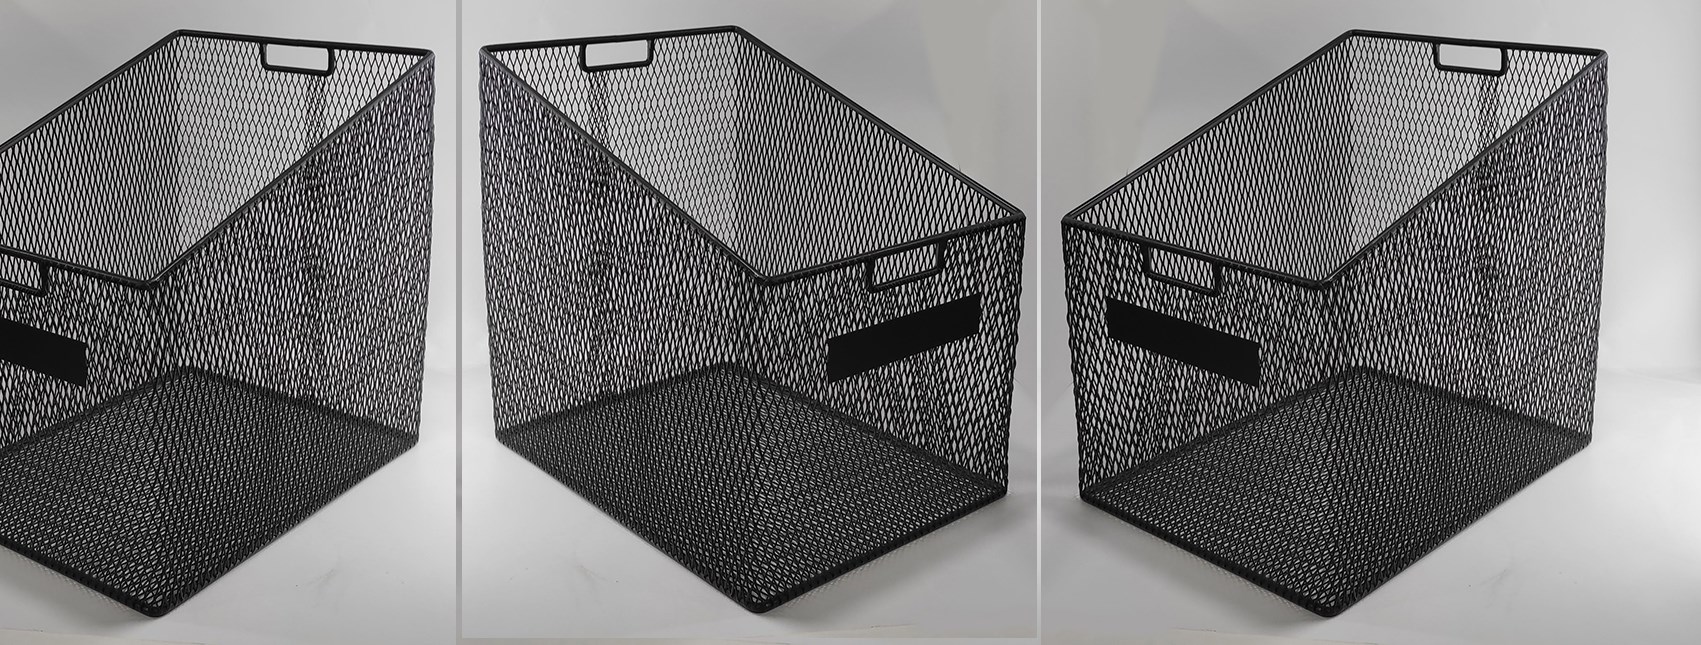 METAL POS PRODUCTS and METAL BASKETS